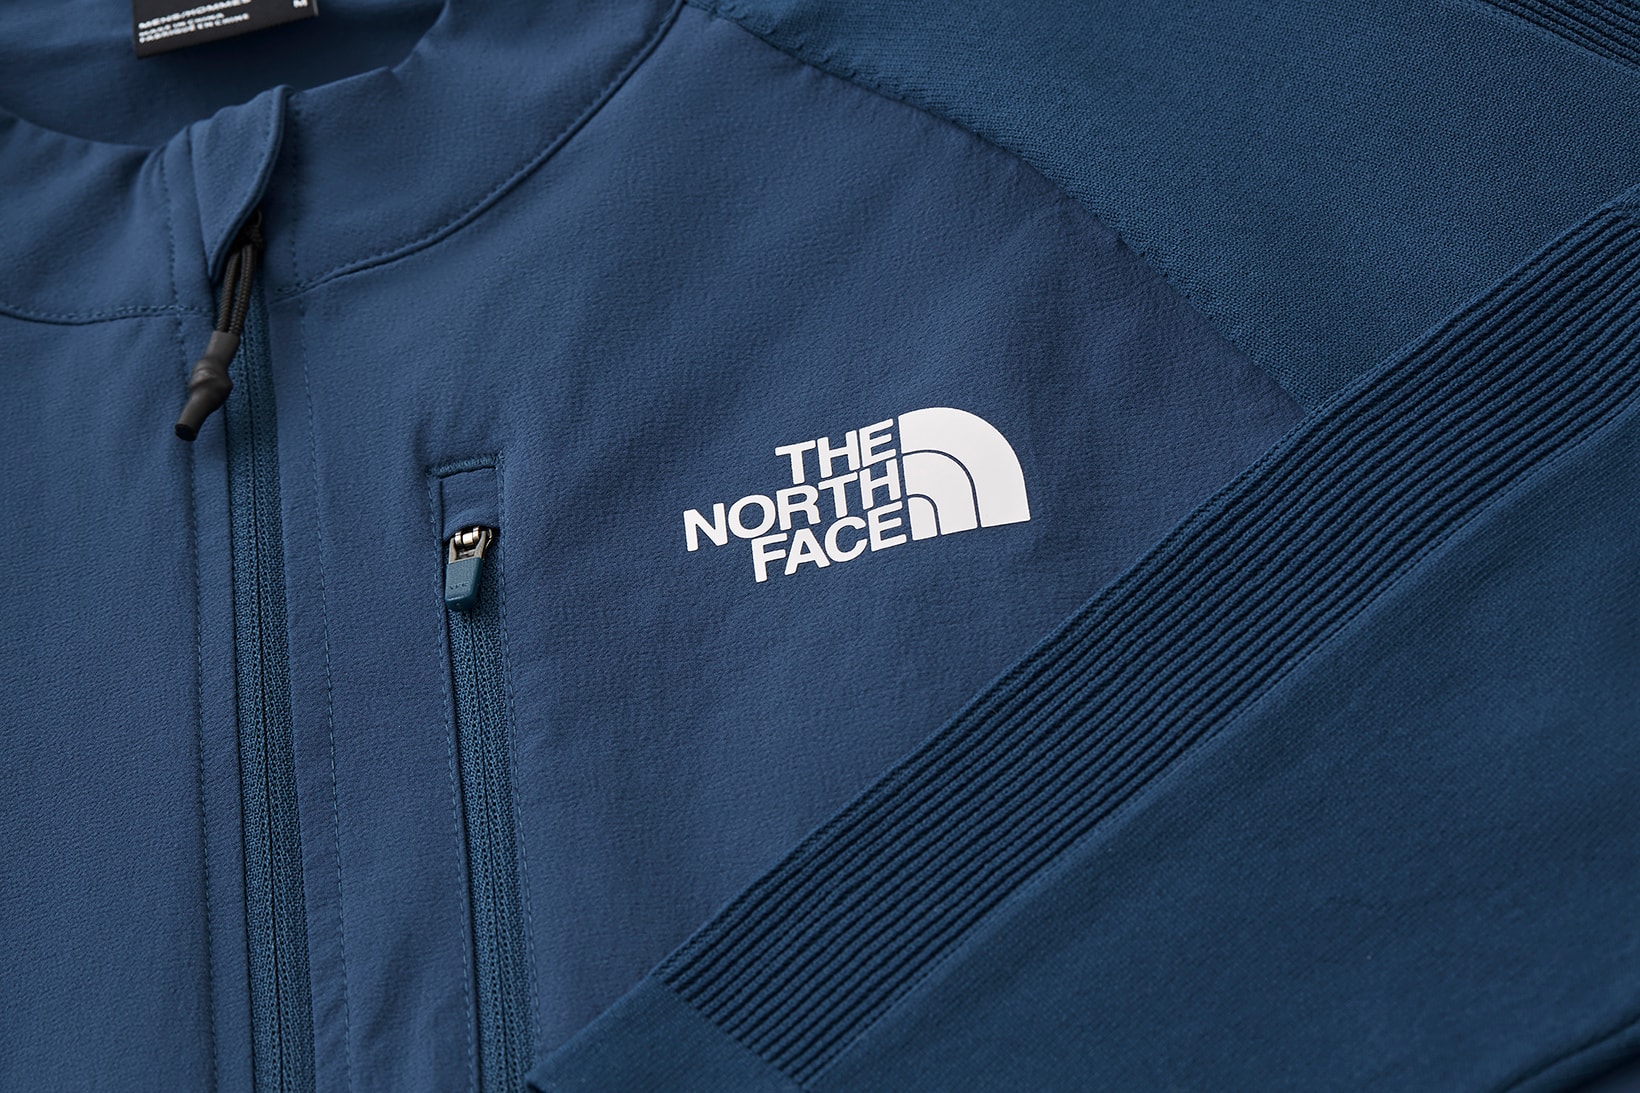 the north face active trail collection jackets shirts leggings sneakers sportswear pink white black blue beige grey